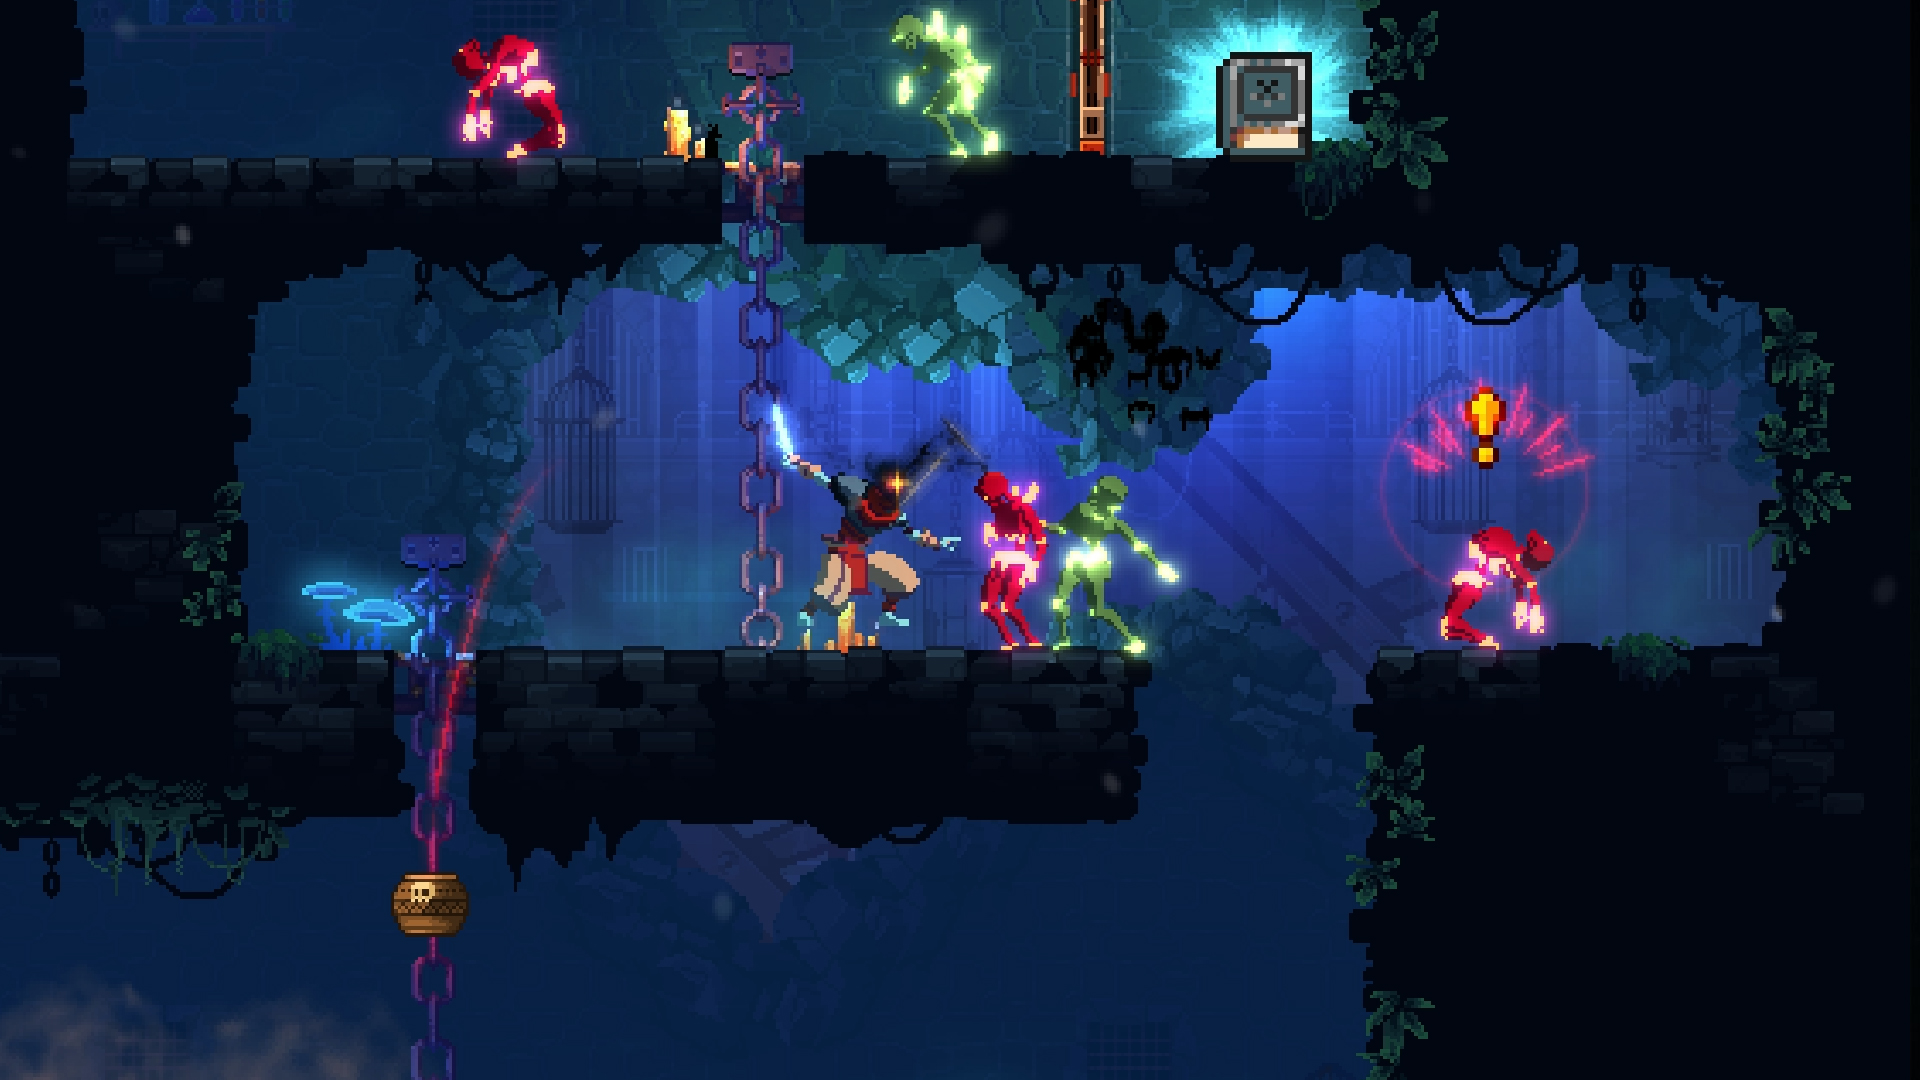 dead cells return to castlevania switch